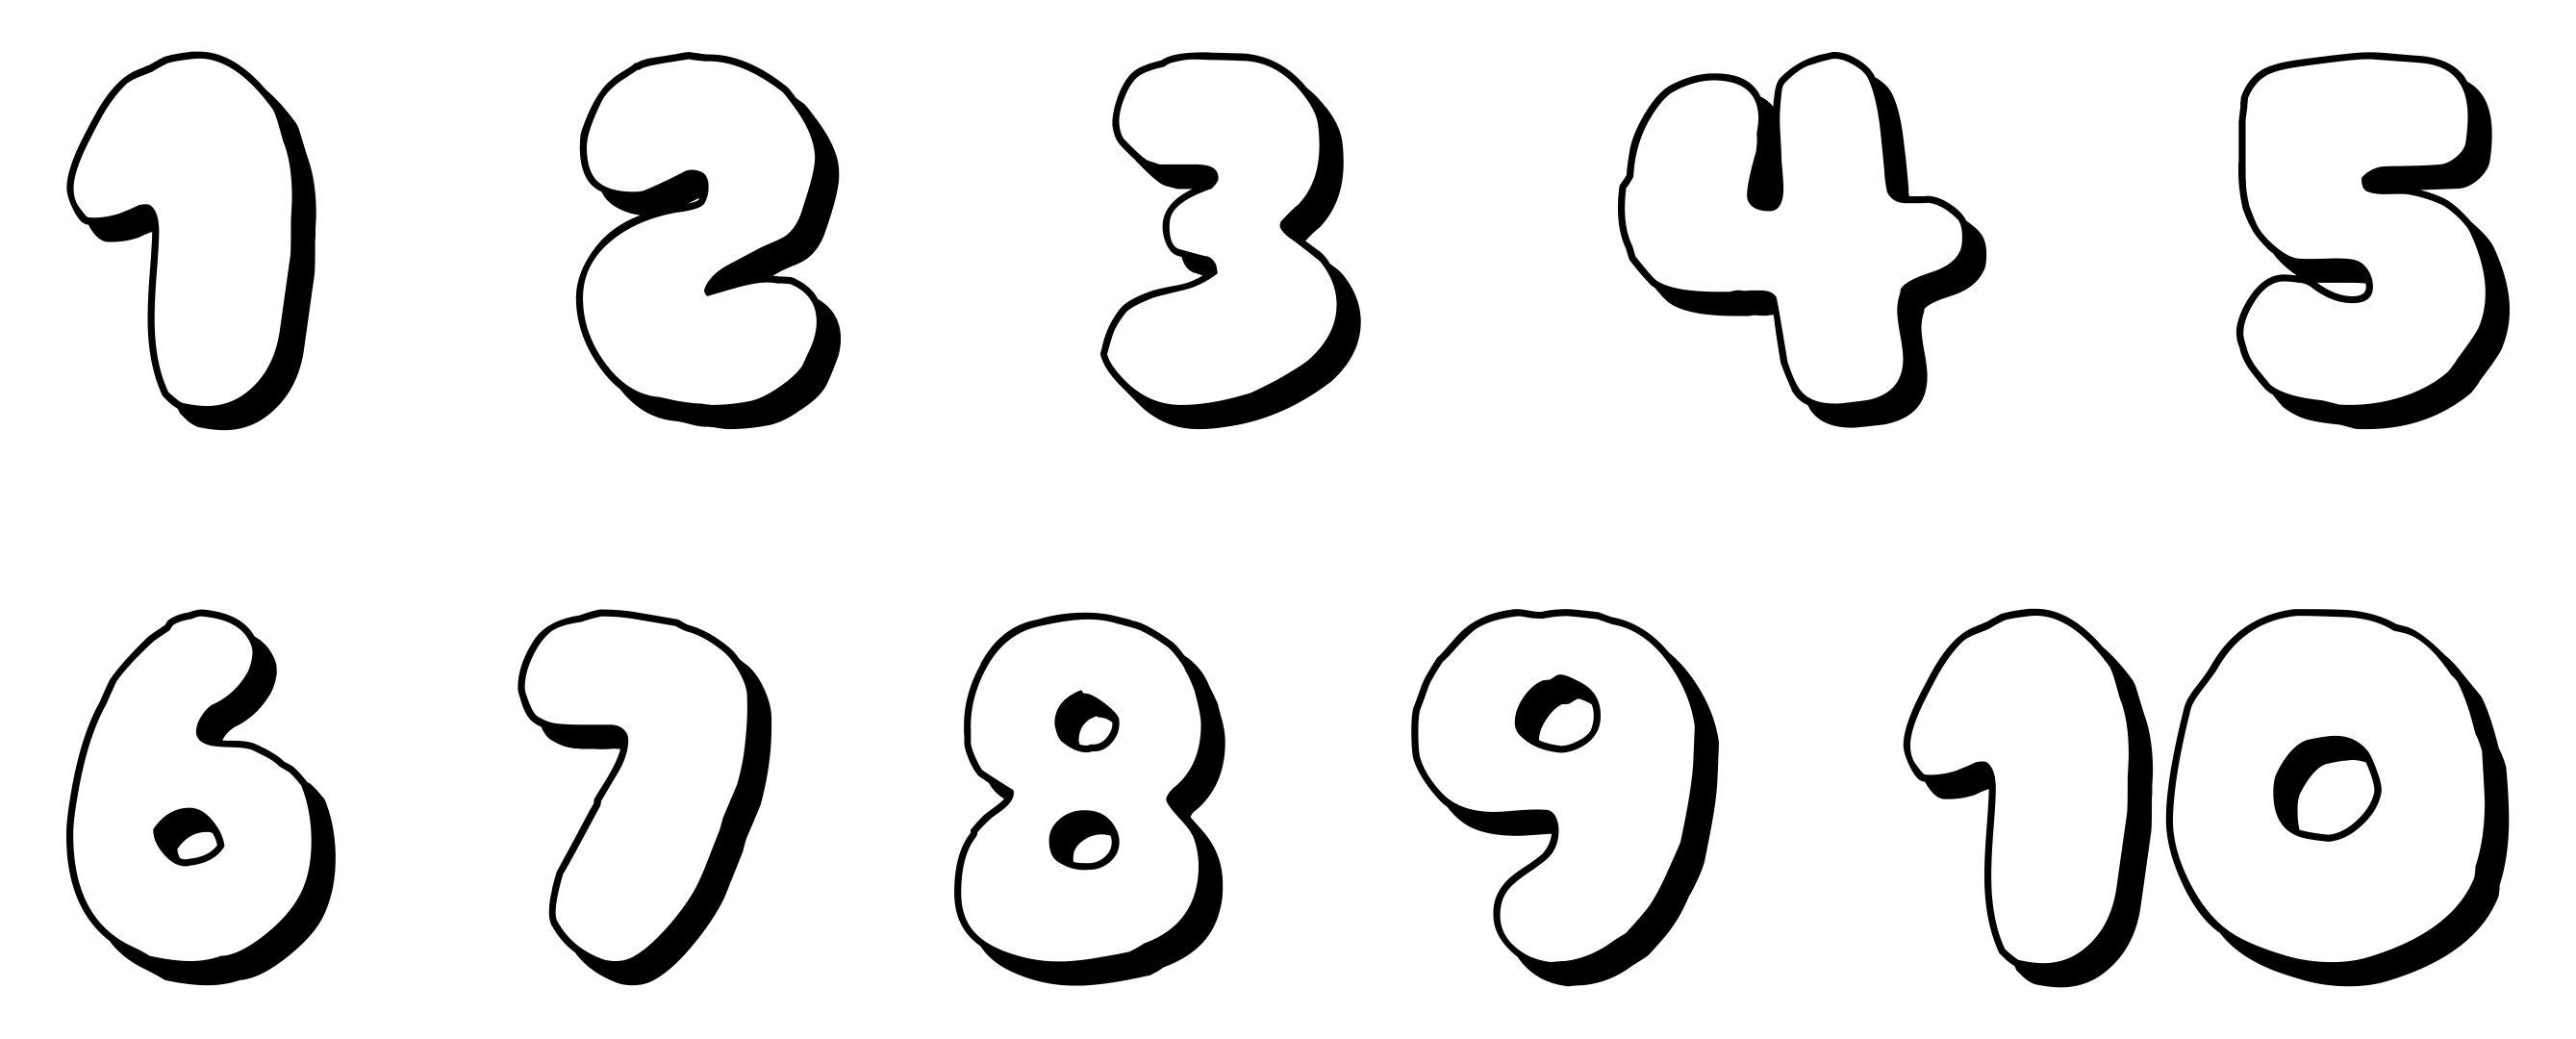 cool bubble letter and numbers fonts